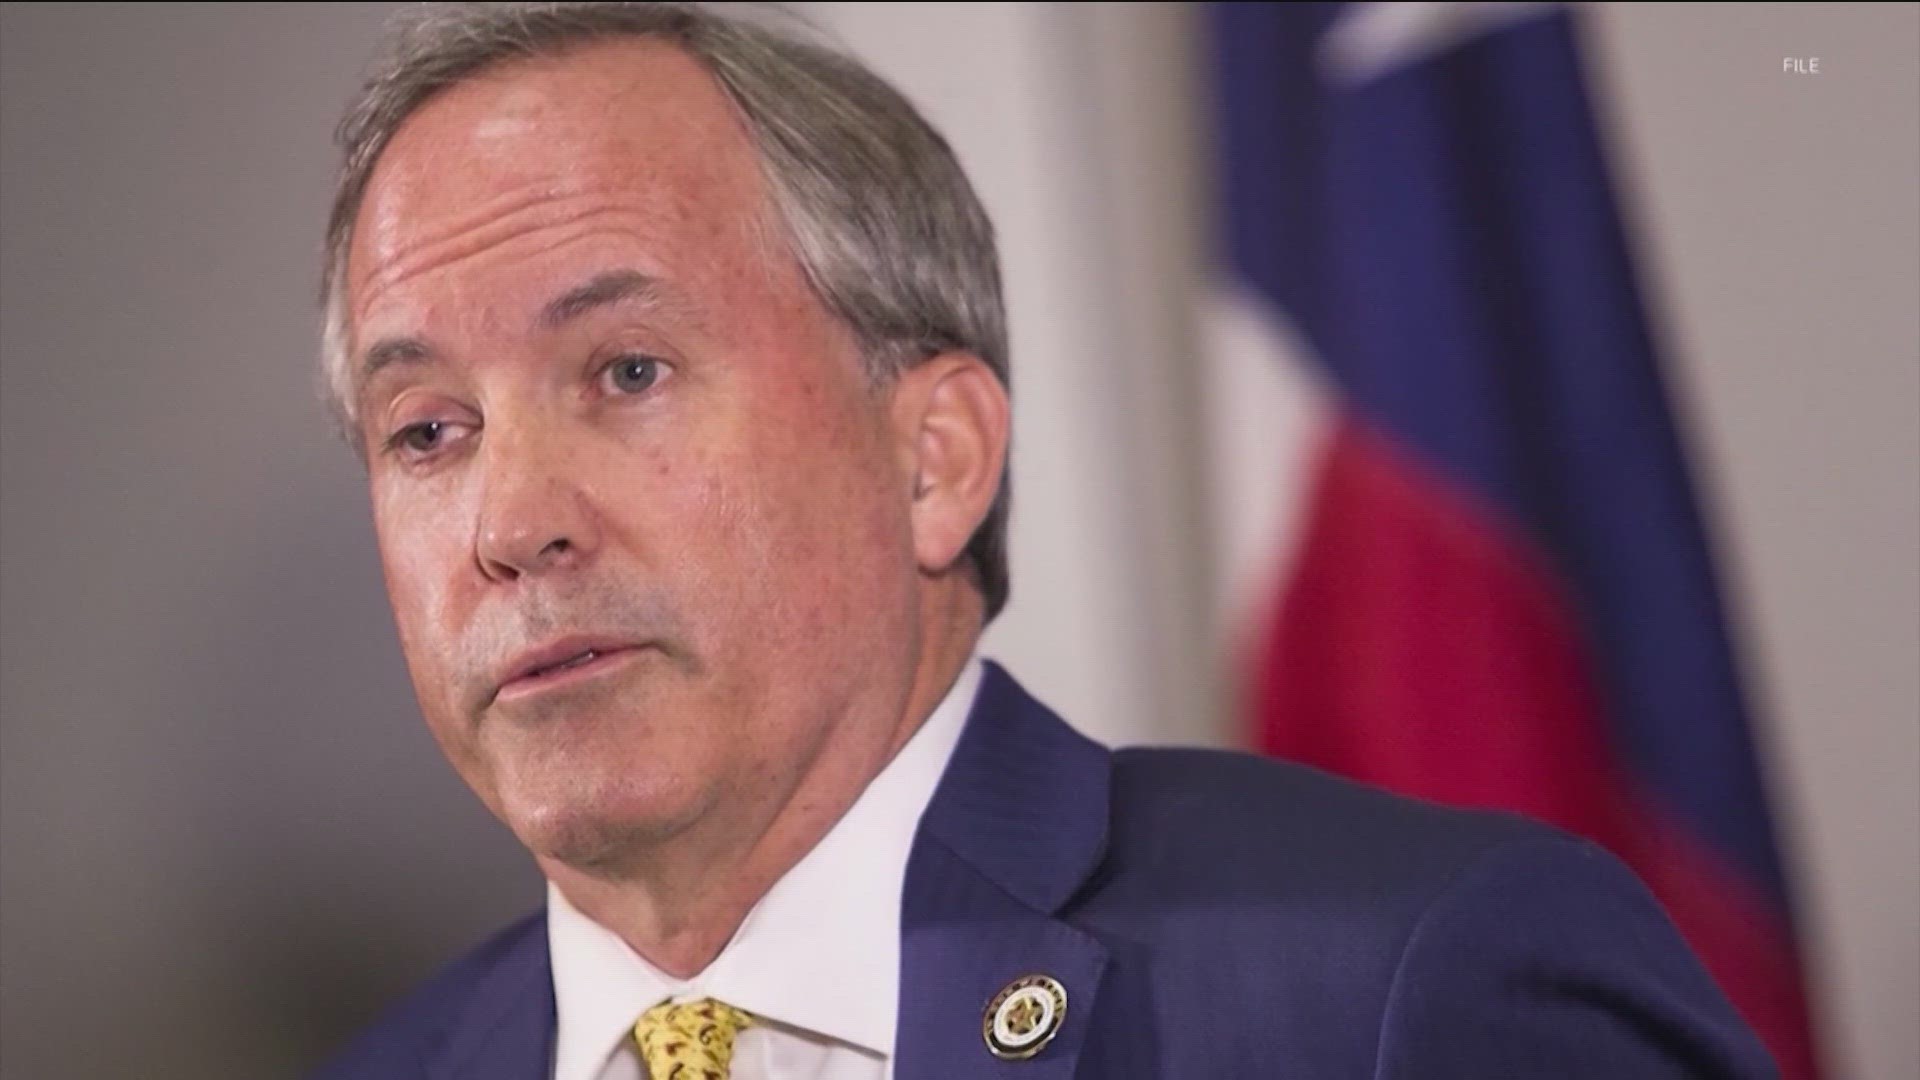 Suspended Texas Attorney General Ken Paxton may have received more benefits from being one of the state's most powerful figures.